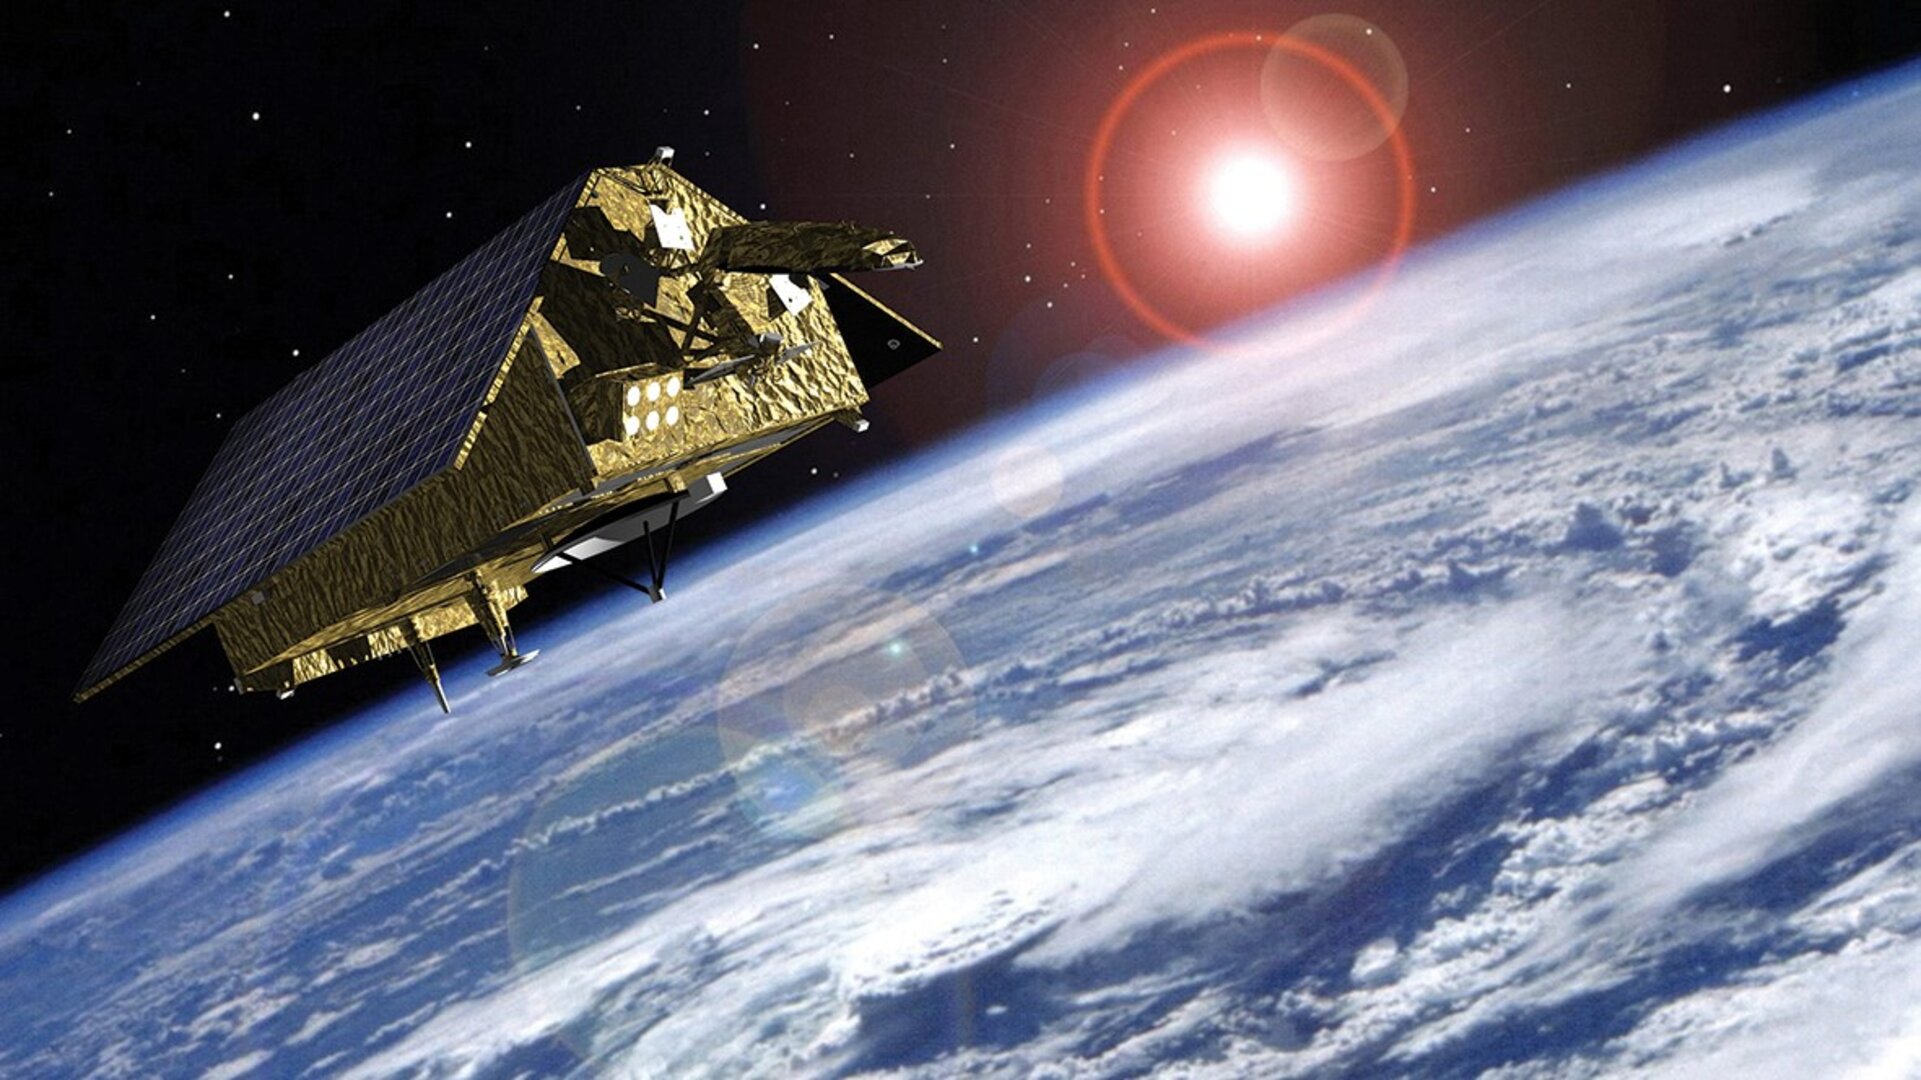 Sentinel 6 (Courtesy of ESA, Airbus Defence and Space)